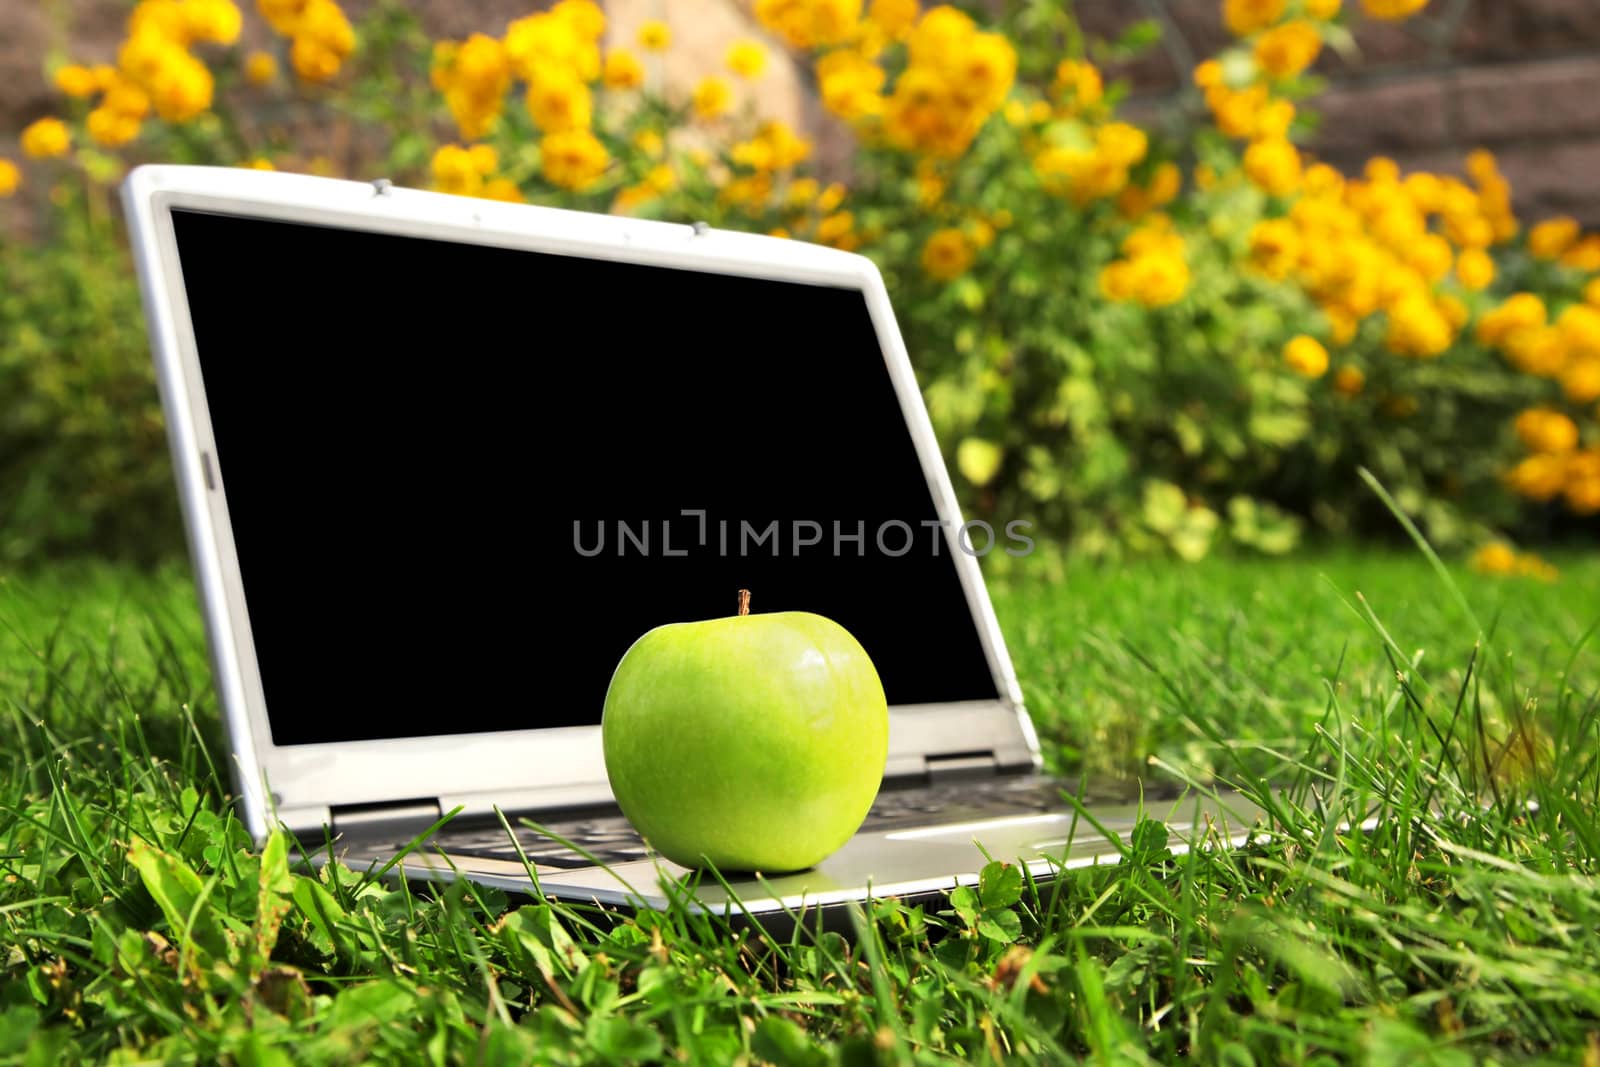 Back to school or vacation time. Opened laptop computerwith black screen ready for your text, left on grass with green apple in focus.